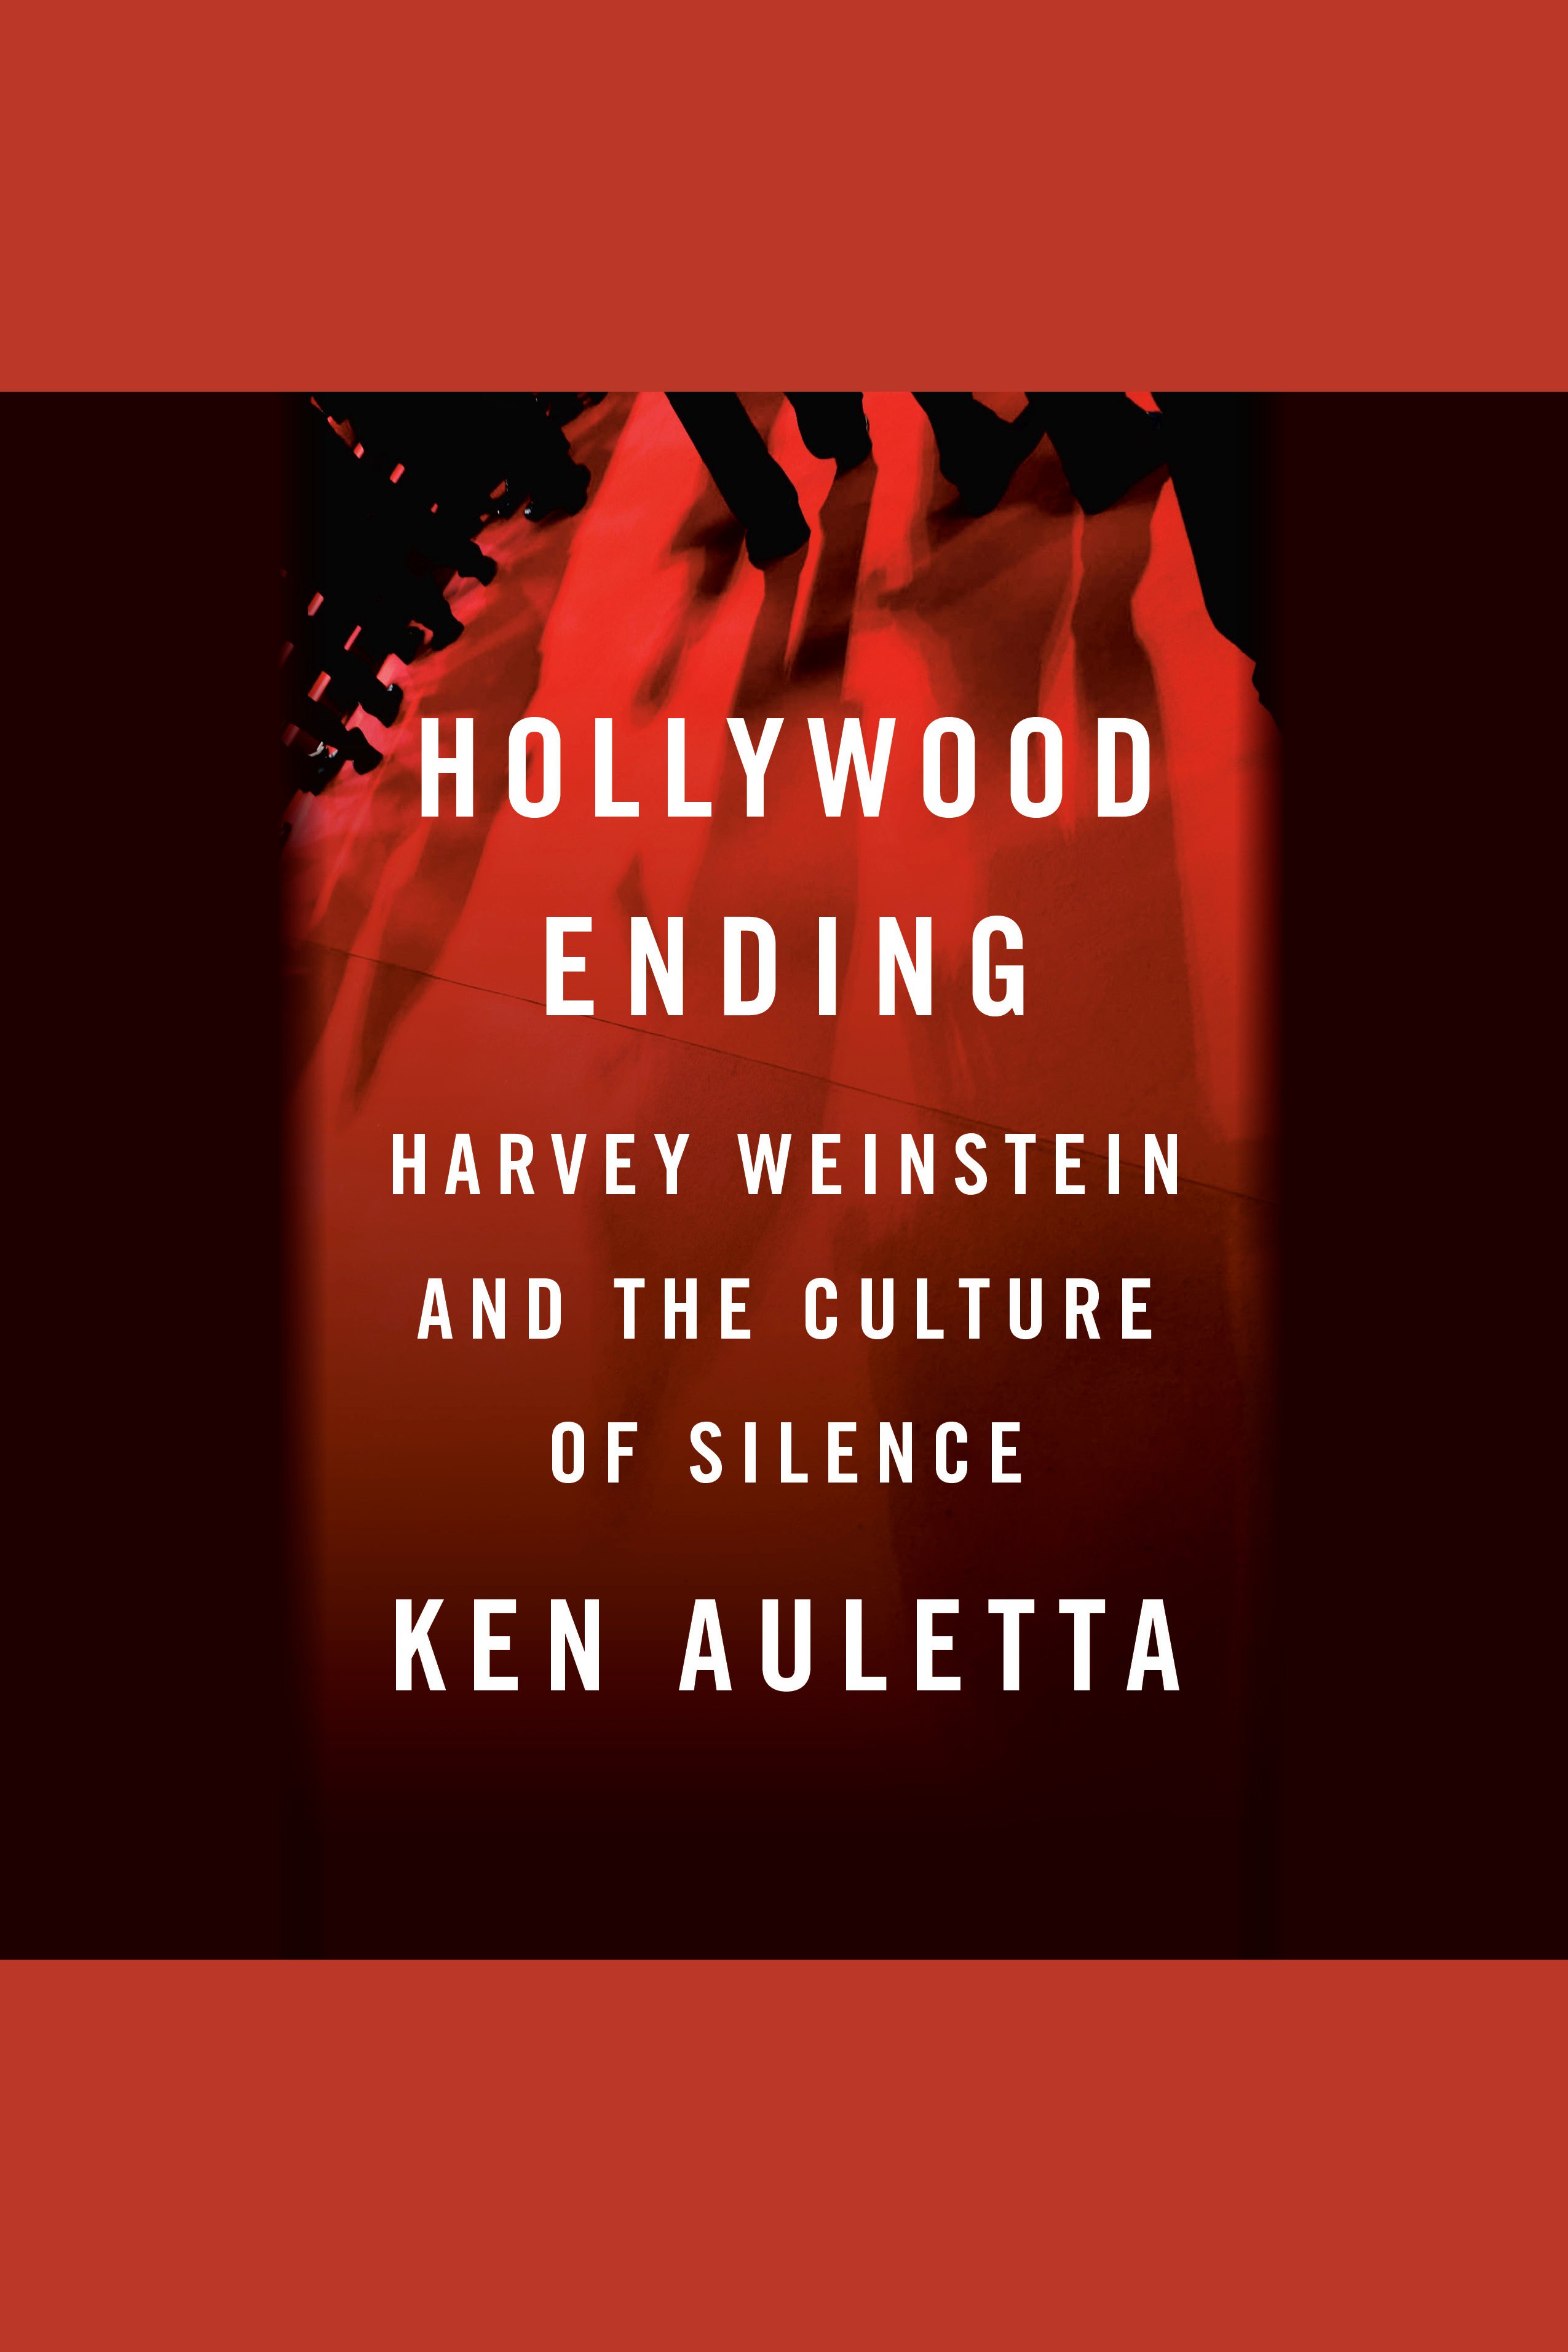 Hollywood Ending Harvey Weinstein and the Culture of Silence